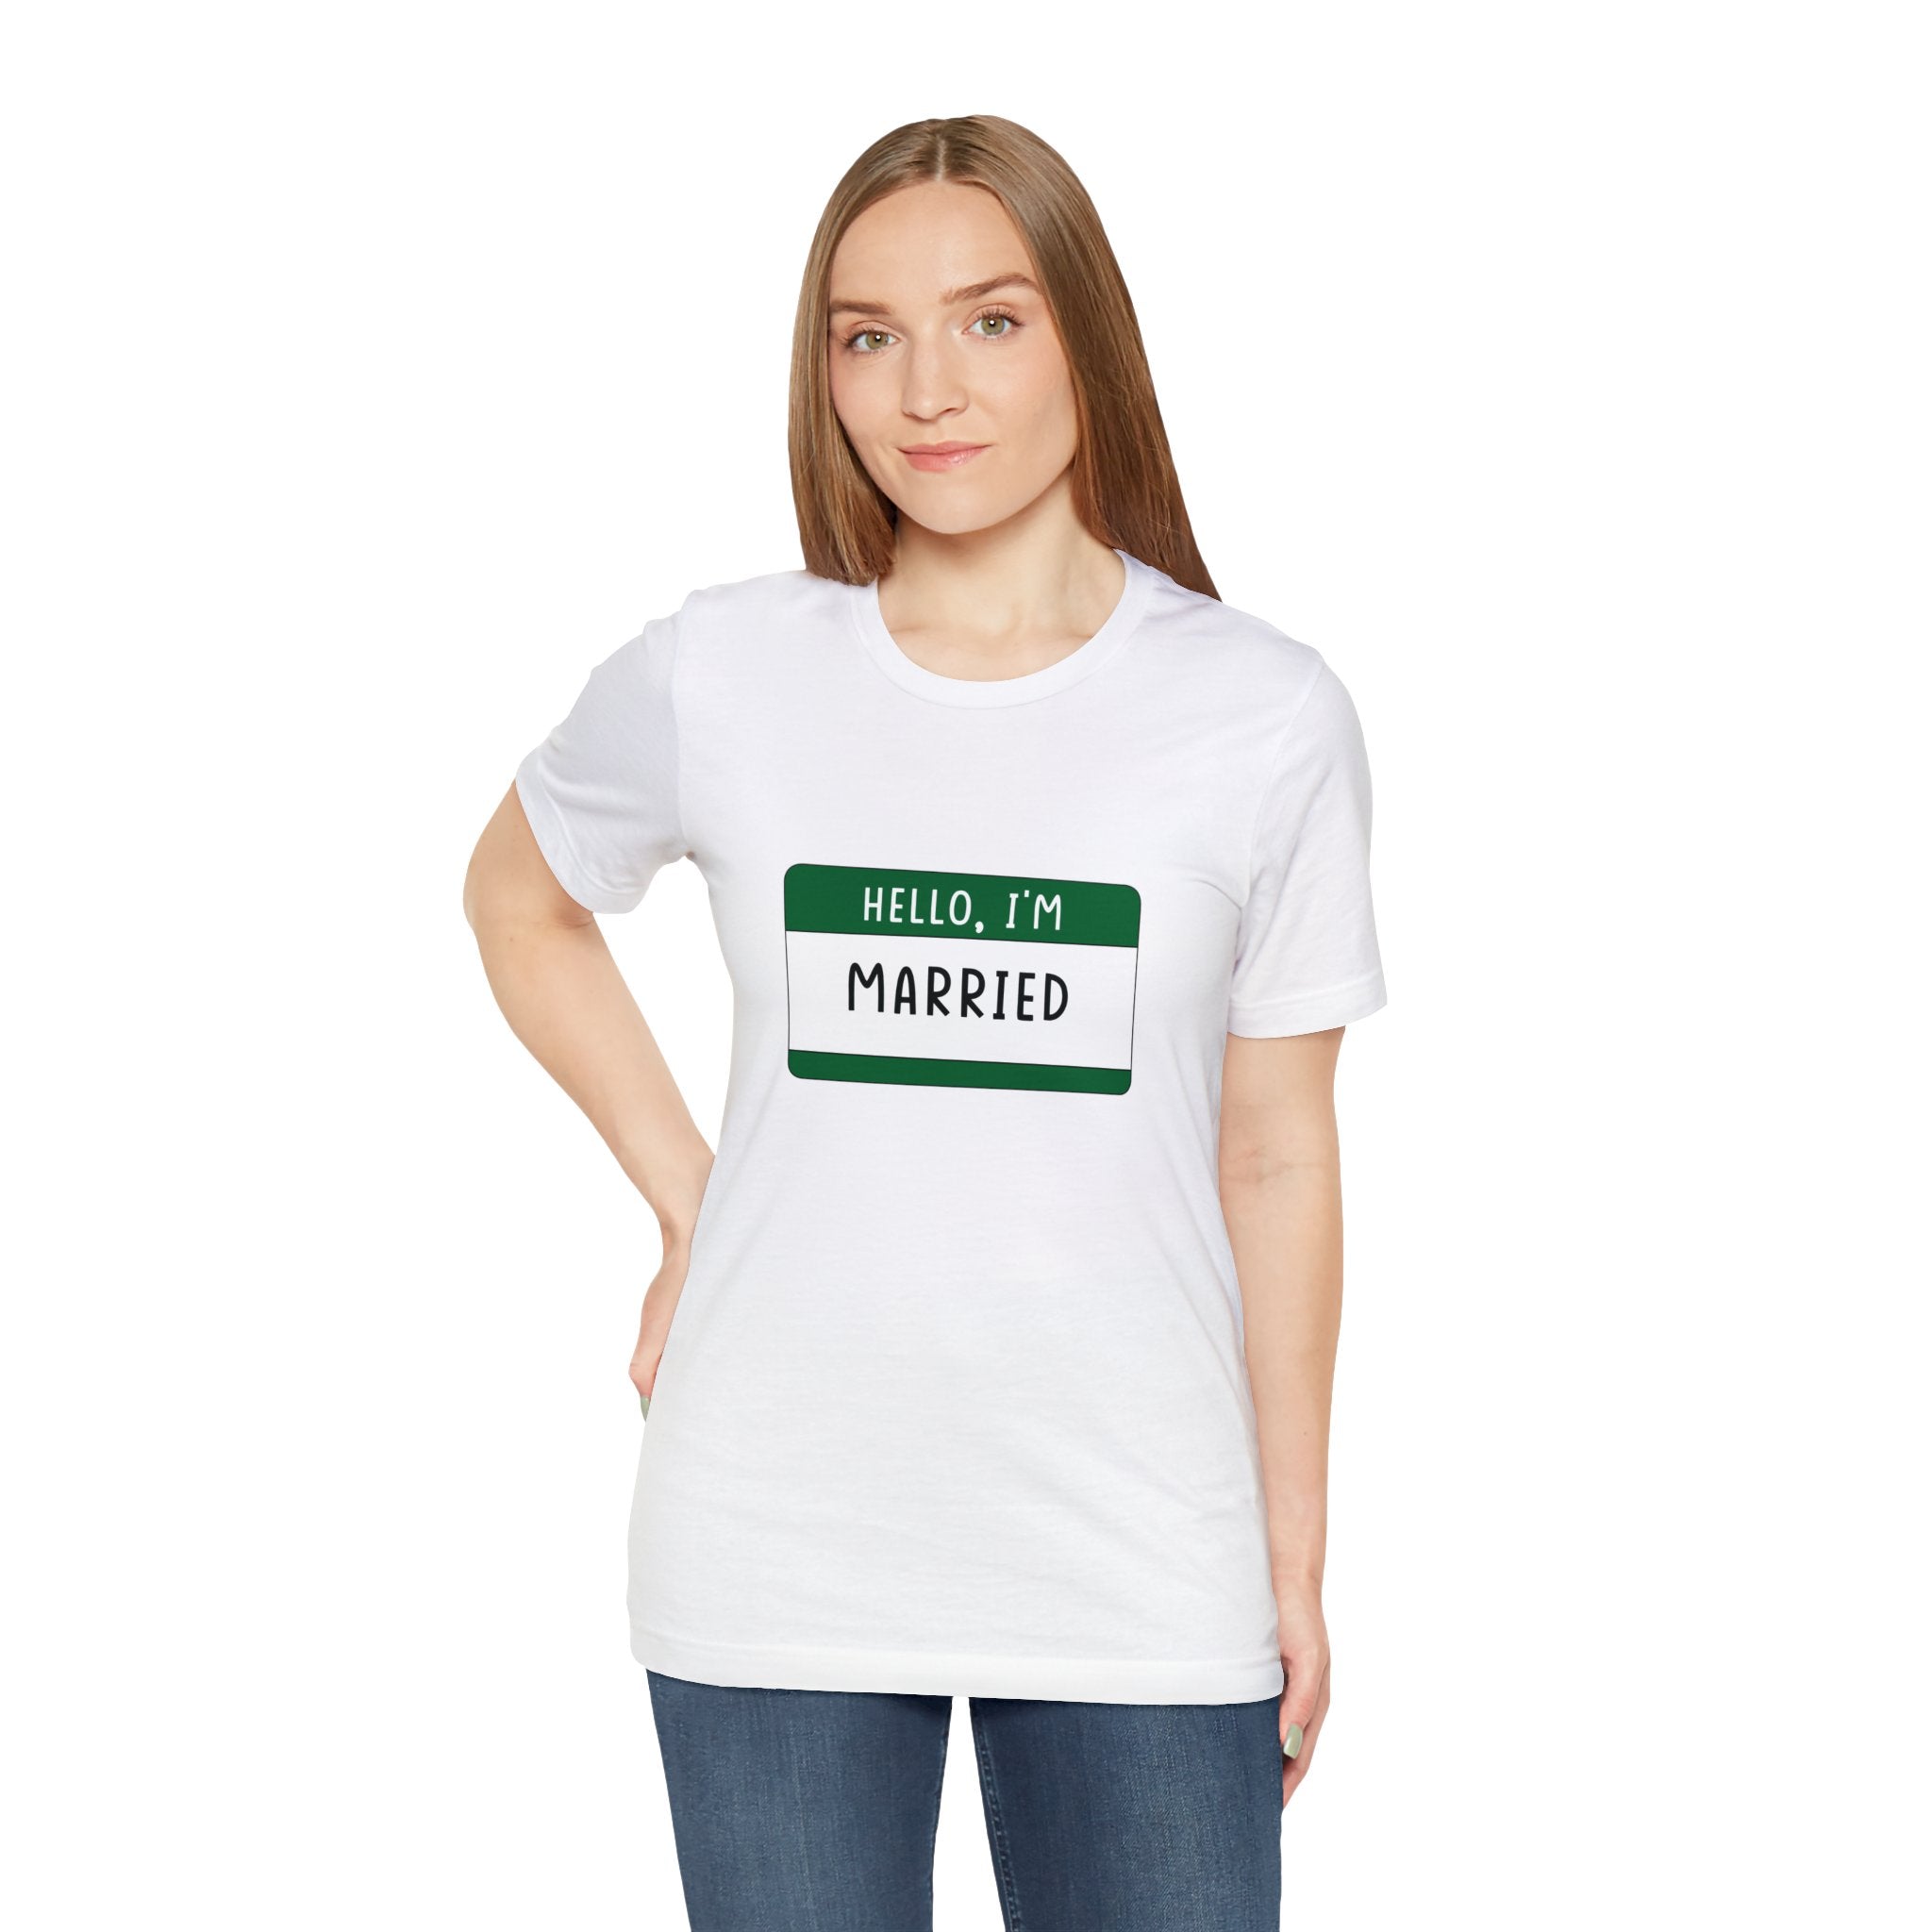 Woman in a white Hello, I'm Married T-Shirt with a green name tag standing against a plain background.